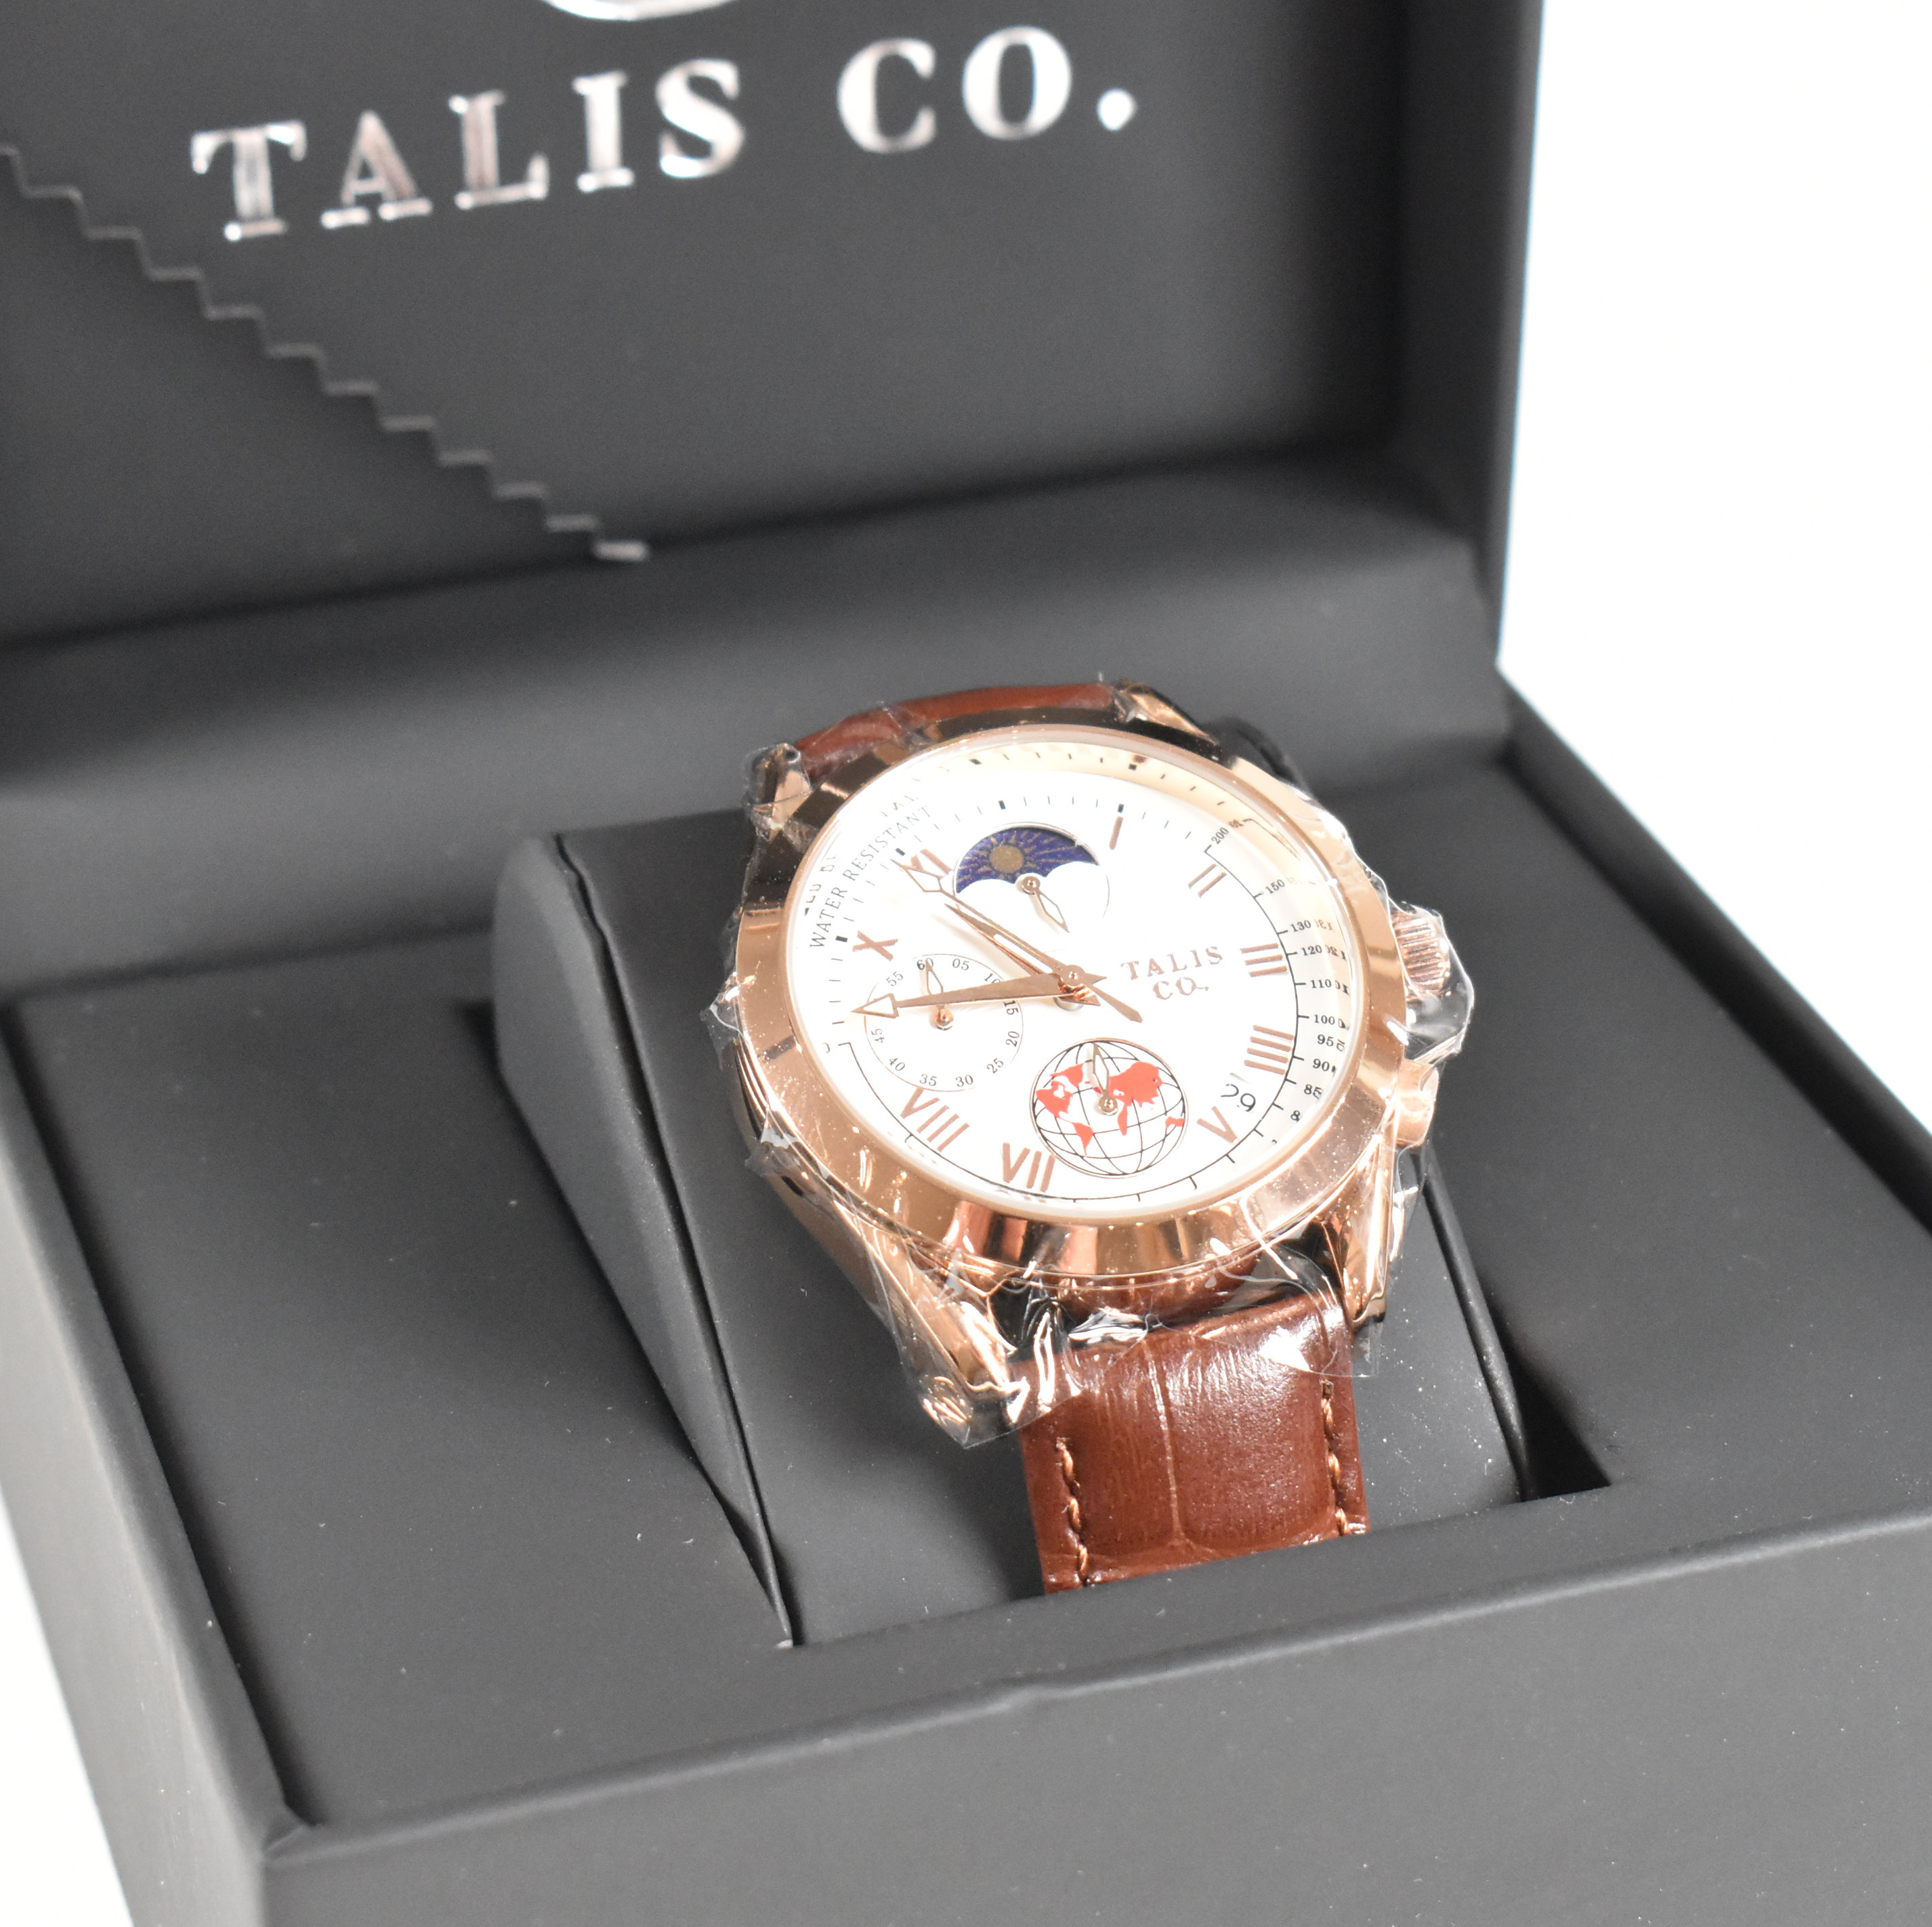 MENS TALIS CO 7120 CHRONOGRAPH WRIST WATCH - Image 2 of 7